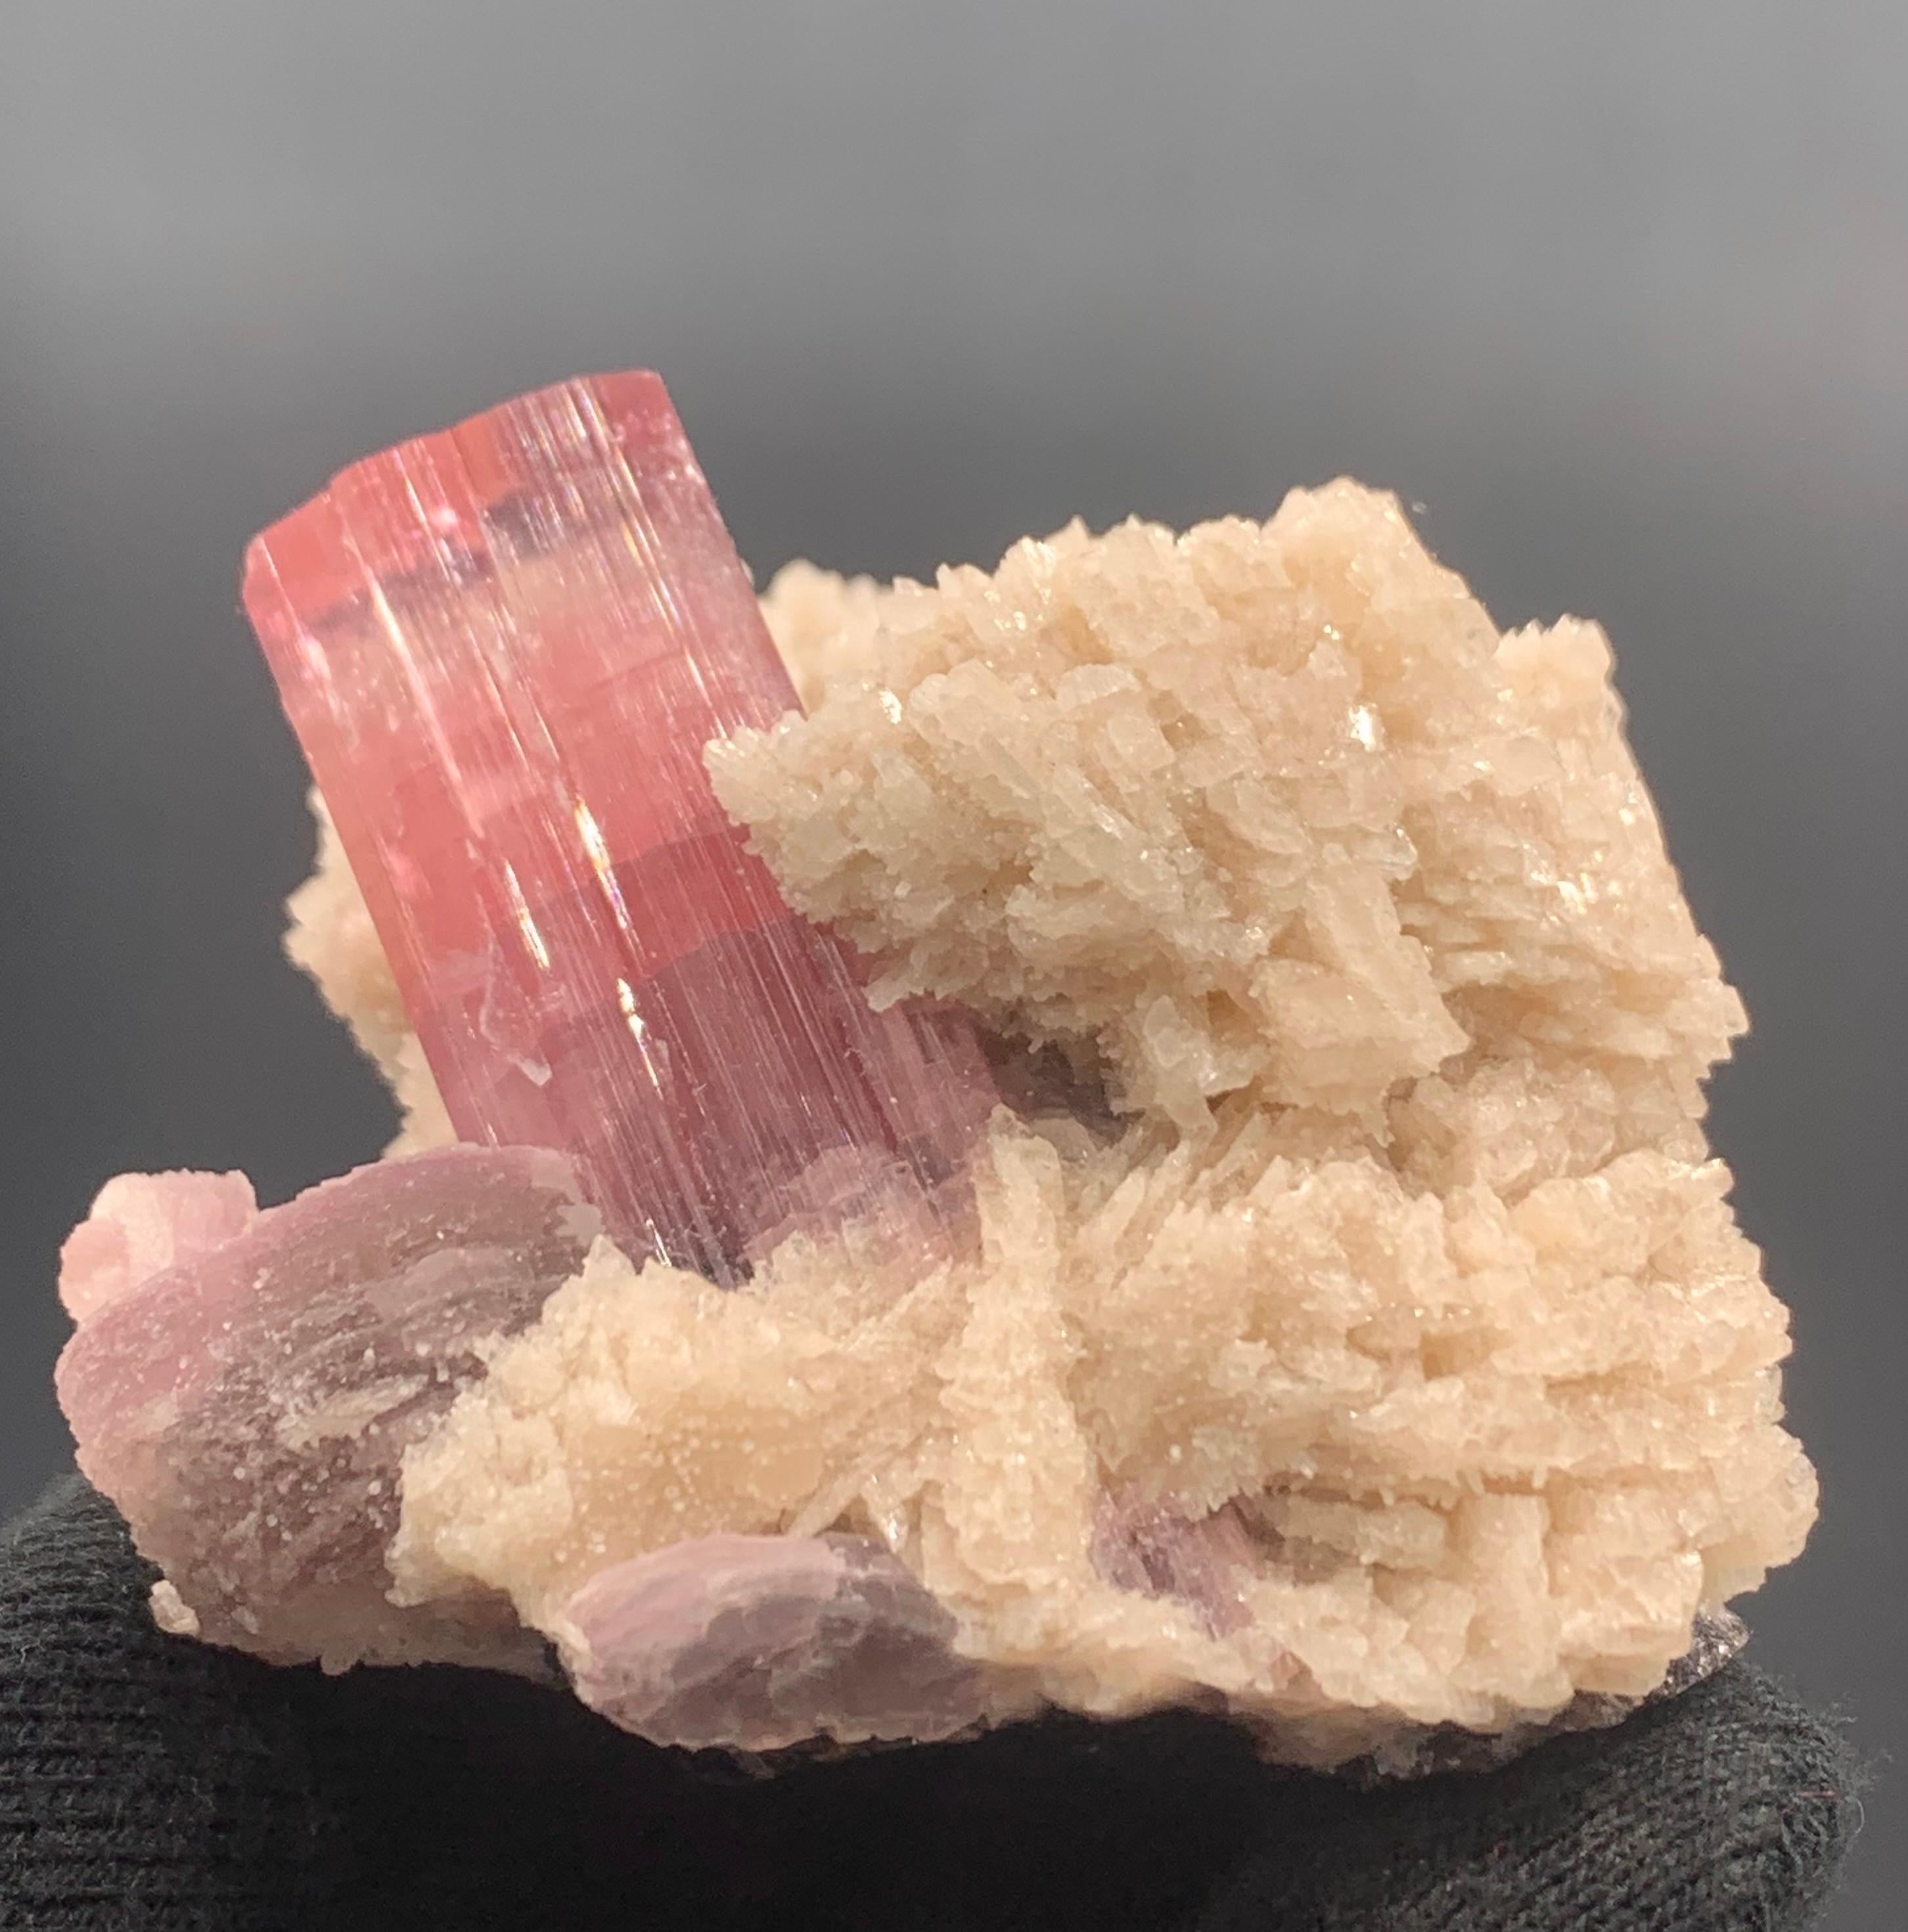 Weight : 143.28 Gram 
Dimension: 5.7 x 5.4 x 4.2 Cm 
Origin : Paprook Mine, Afghanistan 

Tourmaline is a crystalline silicate mineral group in which boron is compounded with elements such as aluminium, iron, magnesium, sodium, lithium, or